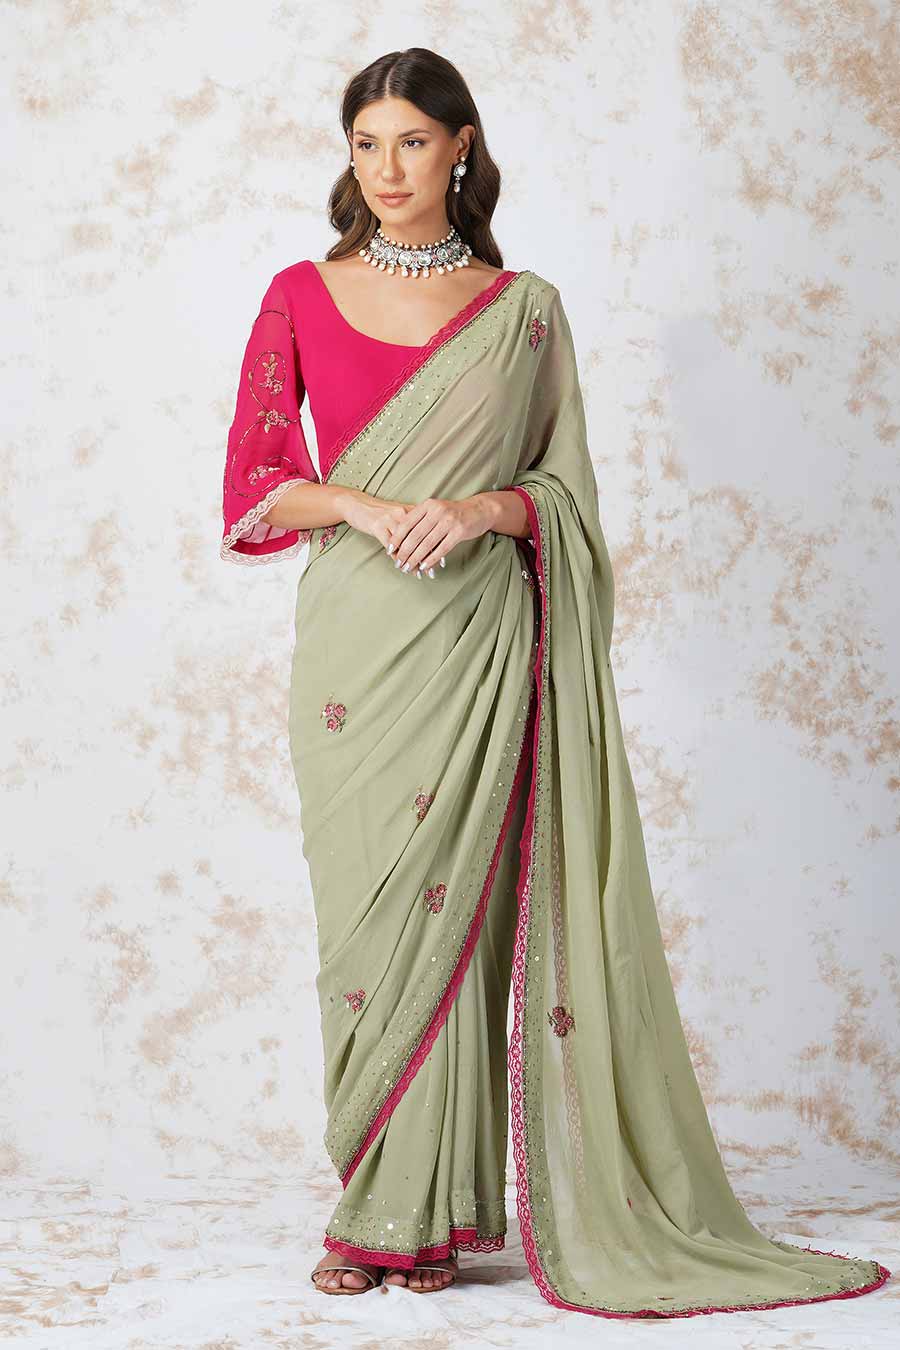 Beaded Green Saree & Pink Unstitched Blouse Set